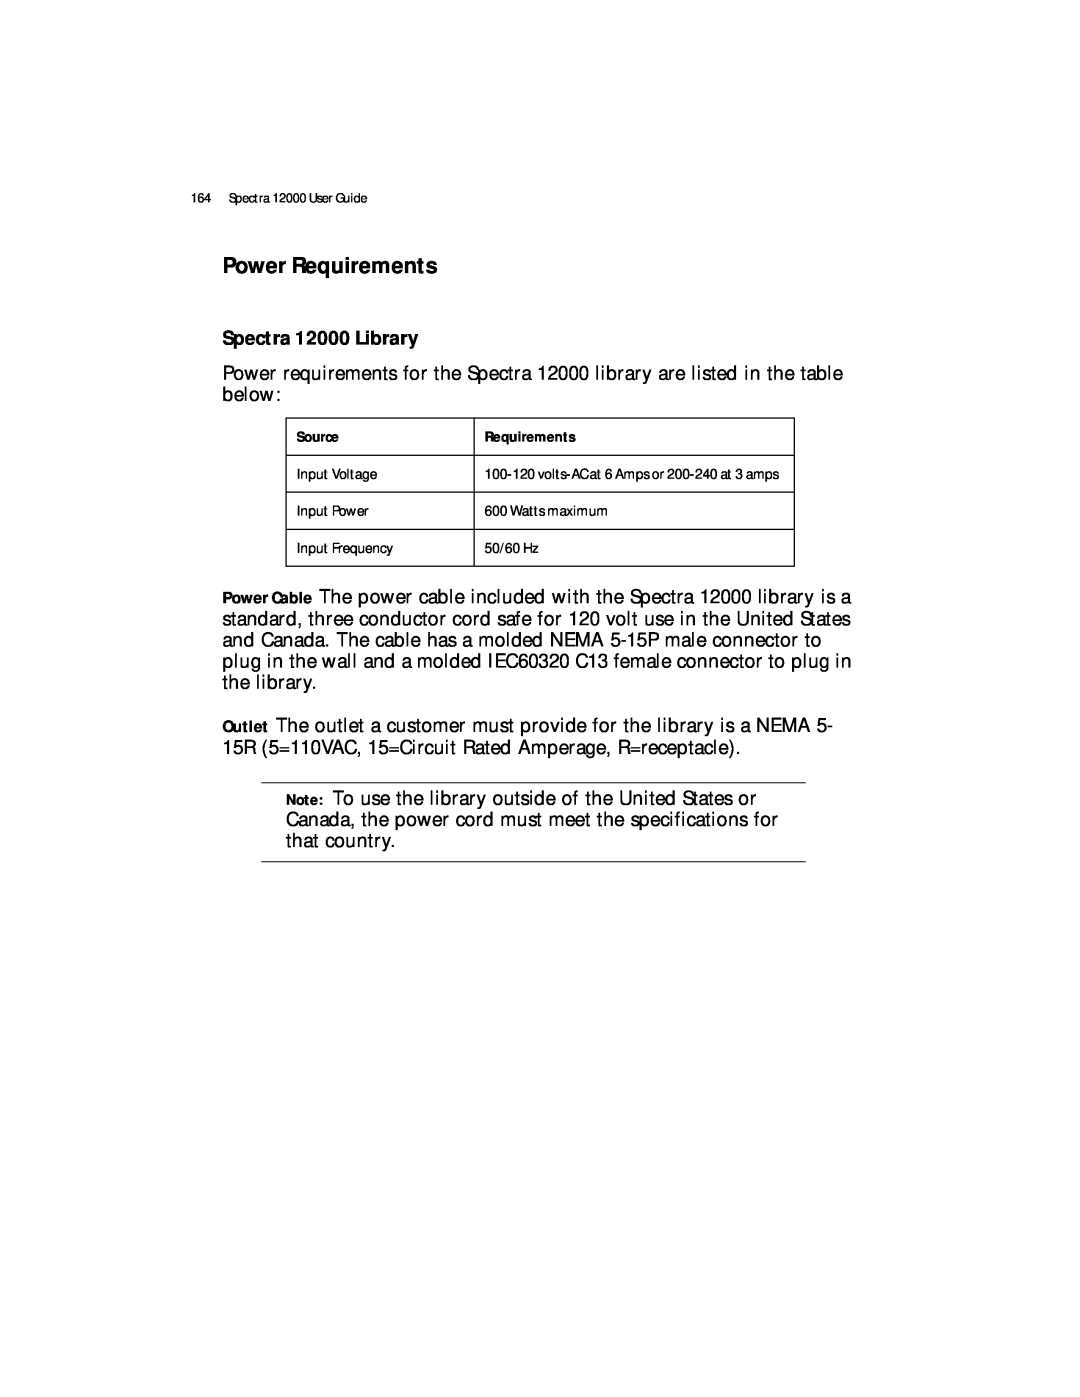 Spectra Logic manual Power Requirements, Spectra 12000 Library 